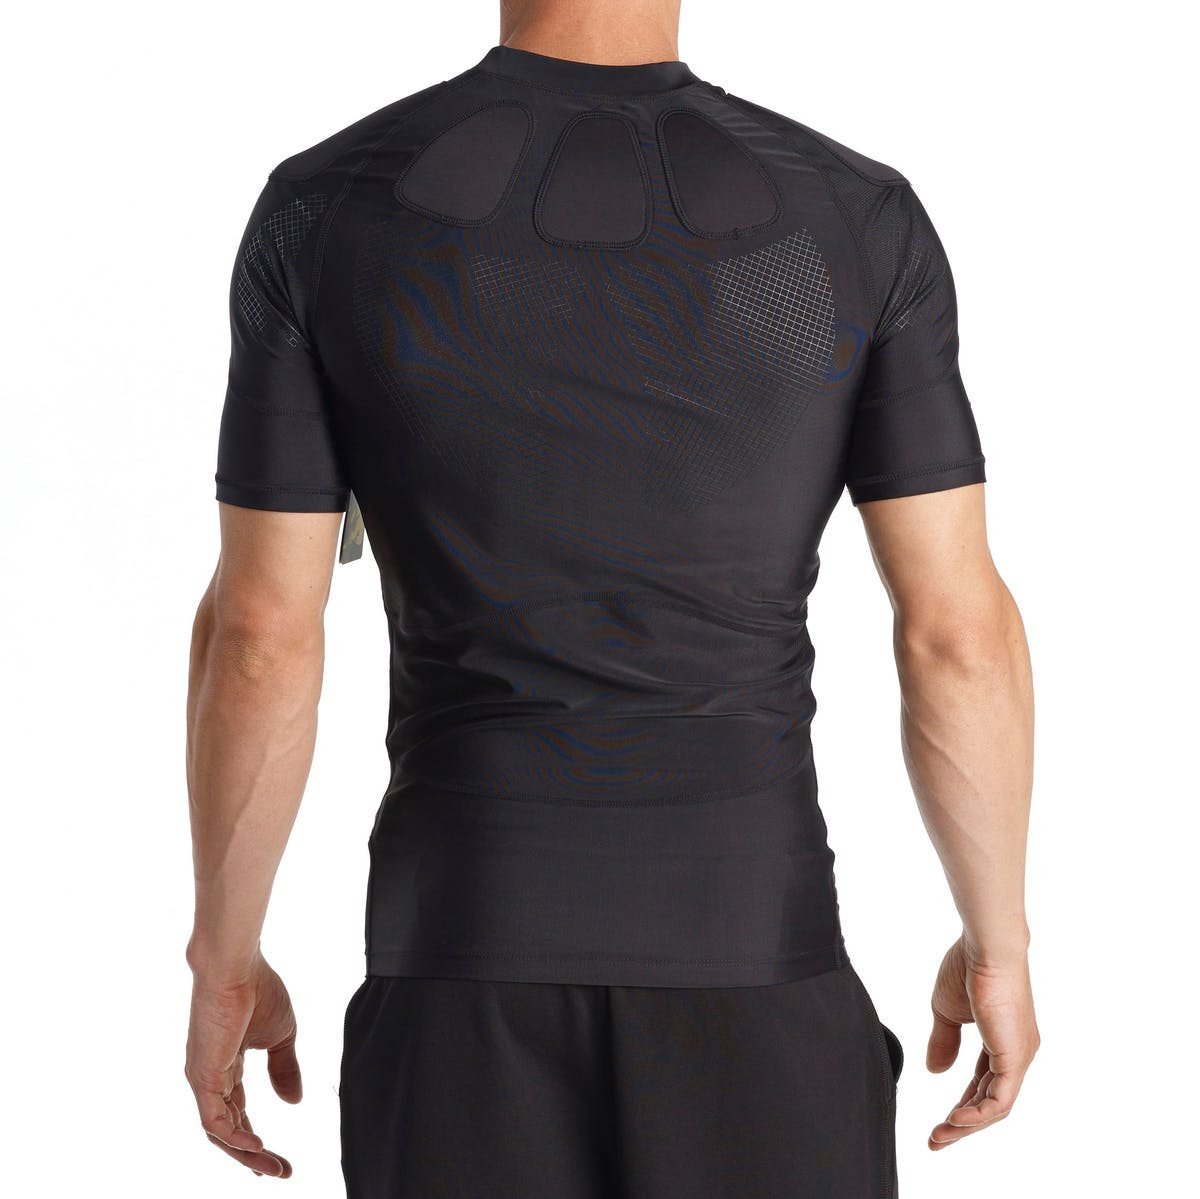 Gold's Gym Men's Body Mapping Compression Shirt